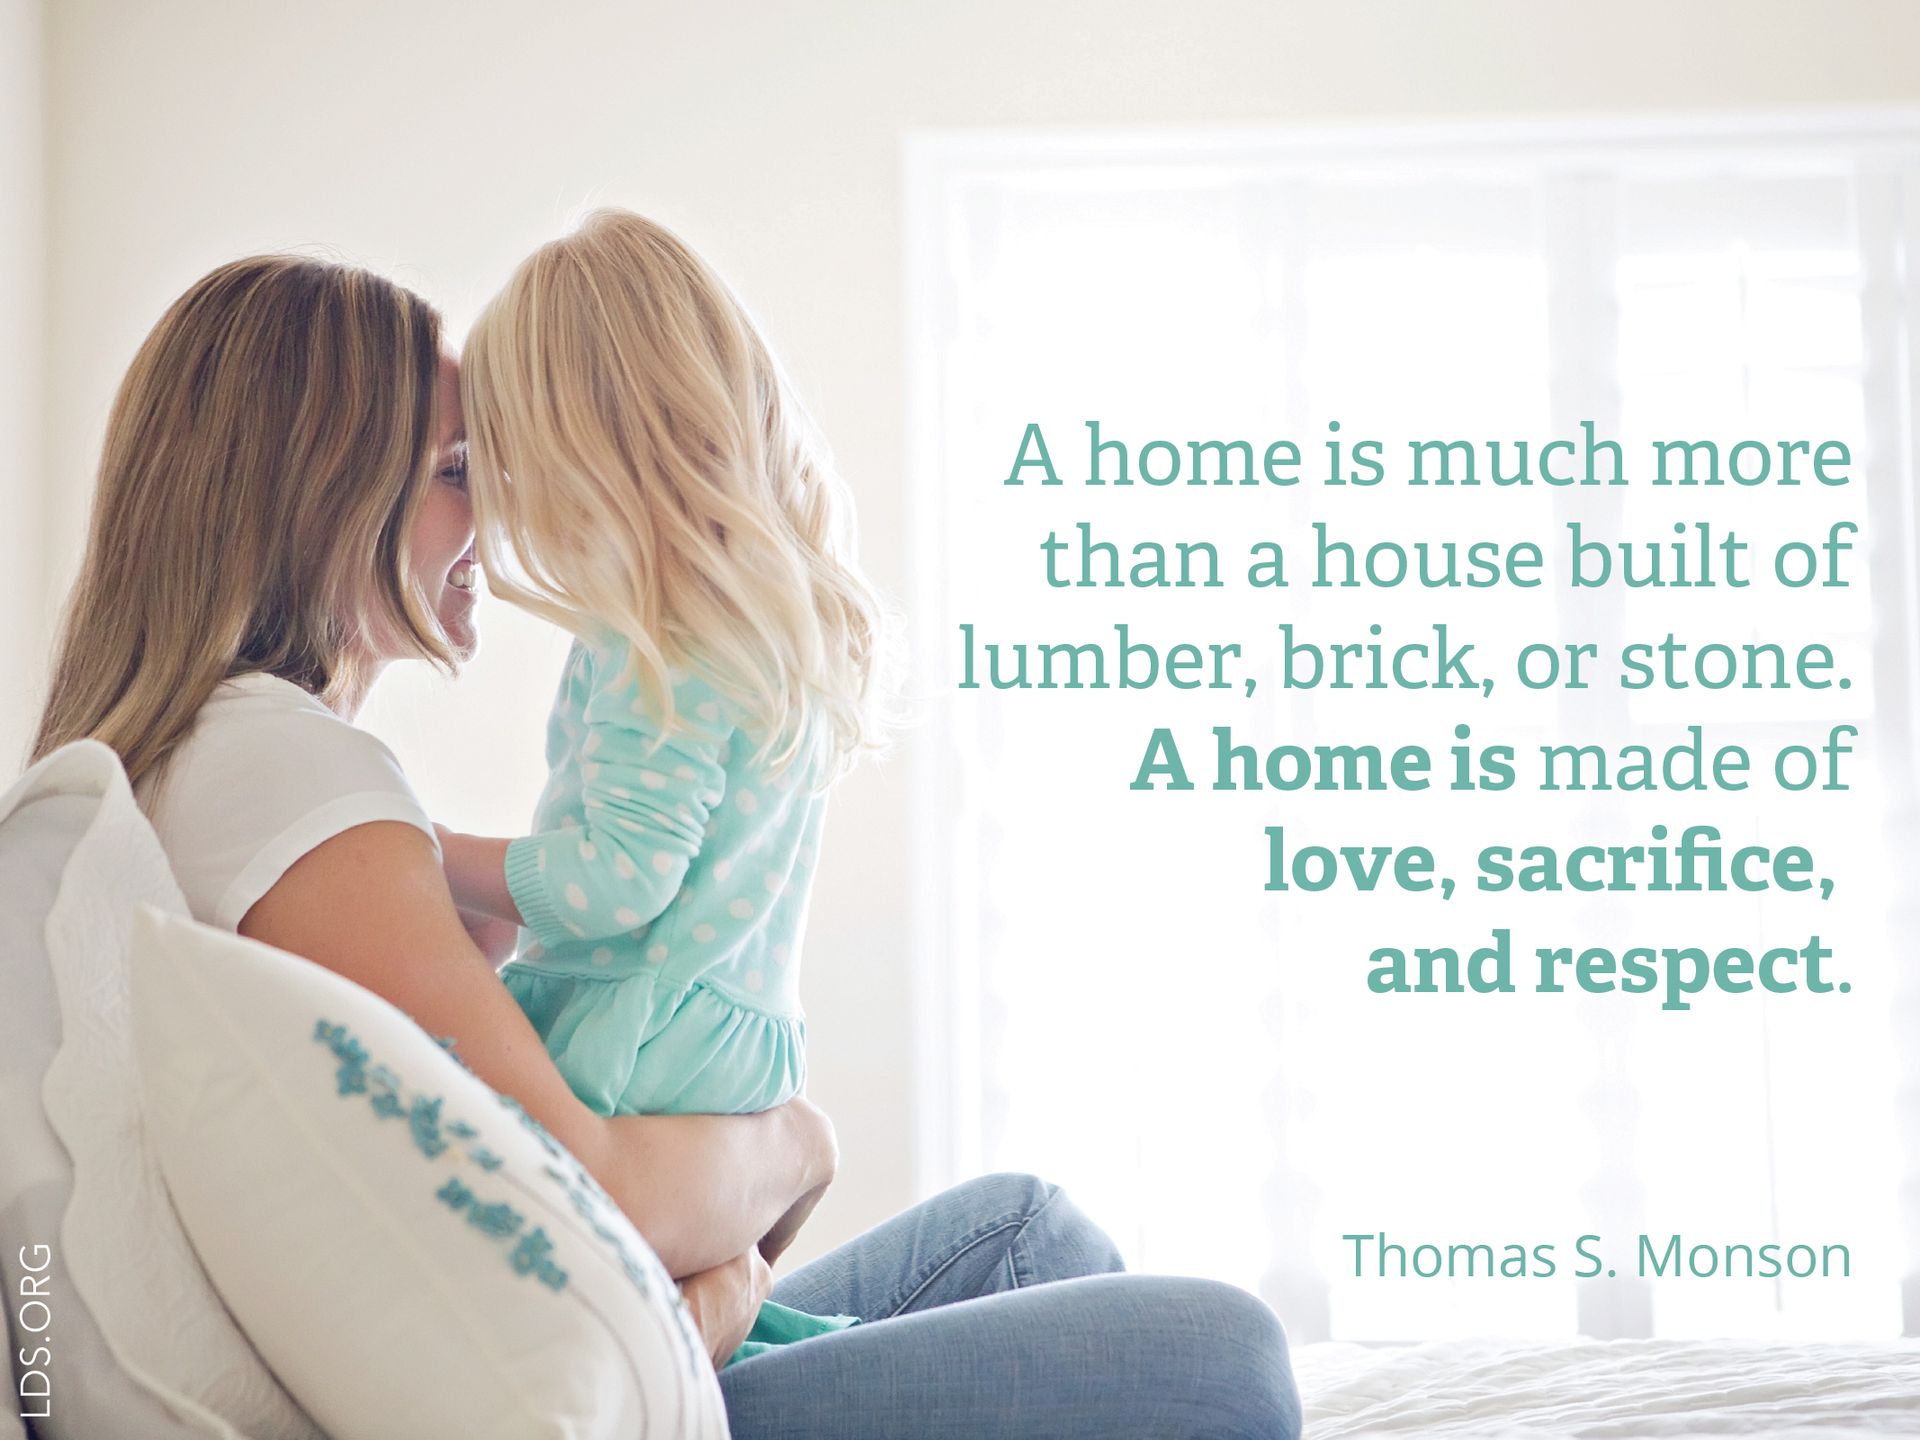 “A home is much more than a house built of lumber, brick, or stone. A home is made of love, sacrifice, and respect.” —President Thomas S. Monson, “Heavenly Homes—Forever Families”